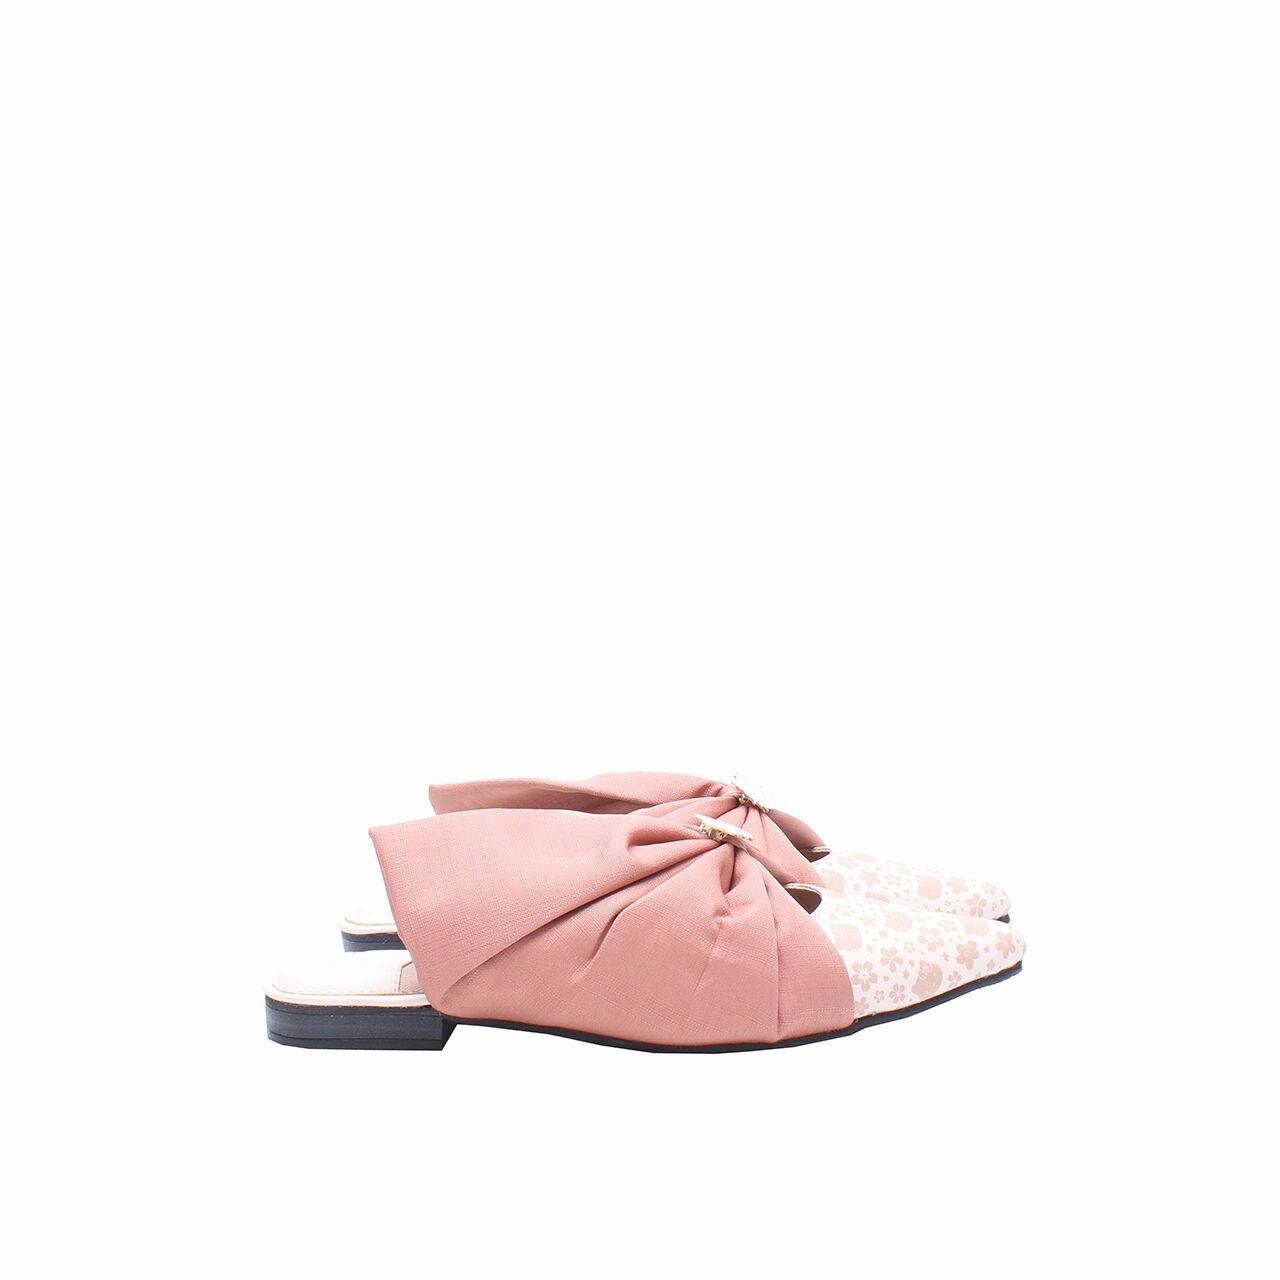 Solesister x Hello Kitty Pink Pearl Kei Mules Sandals